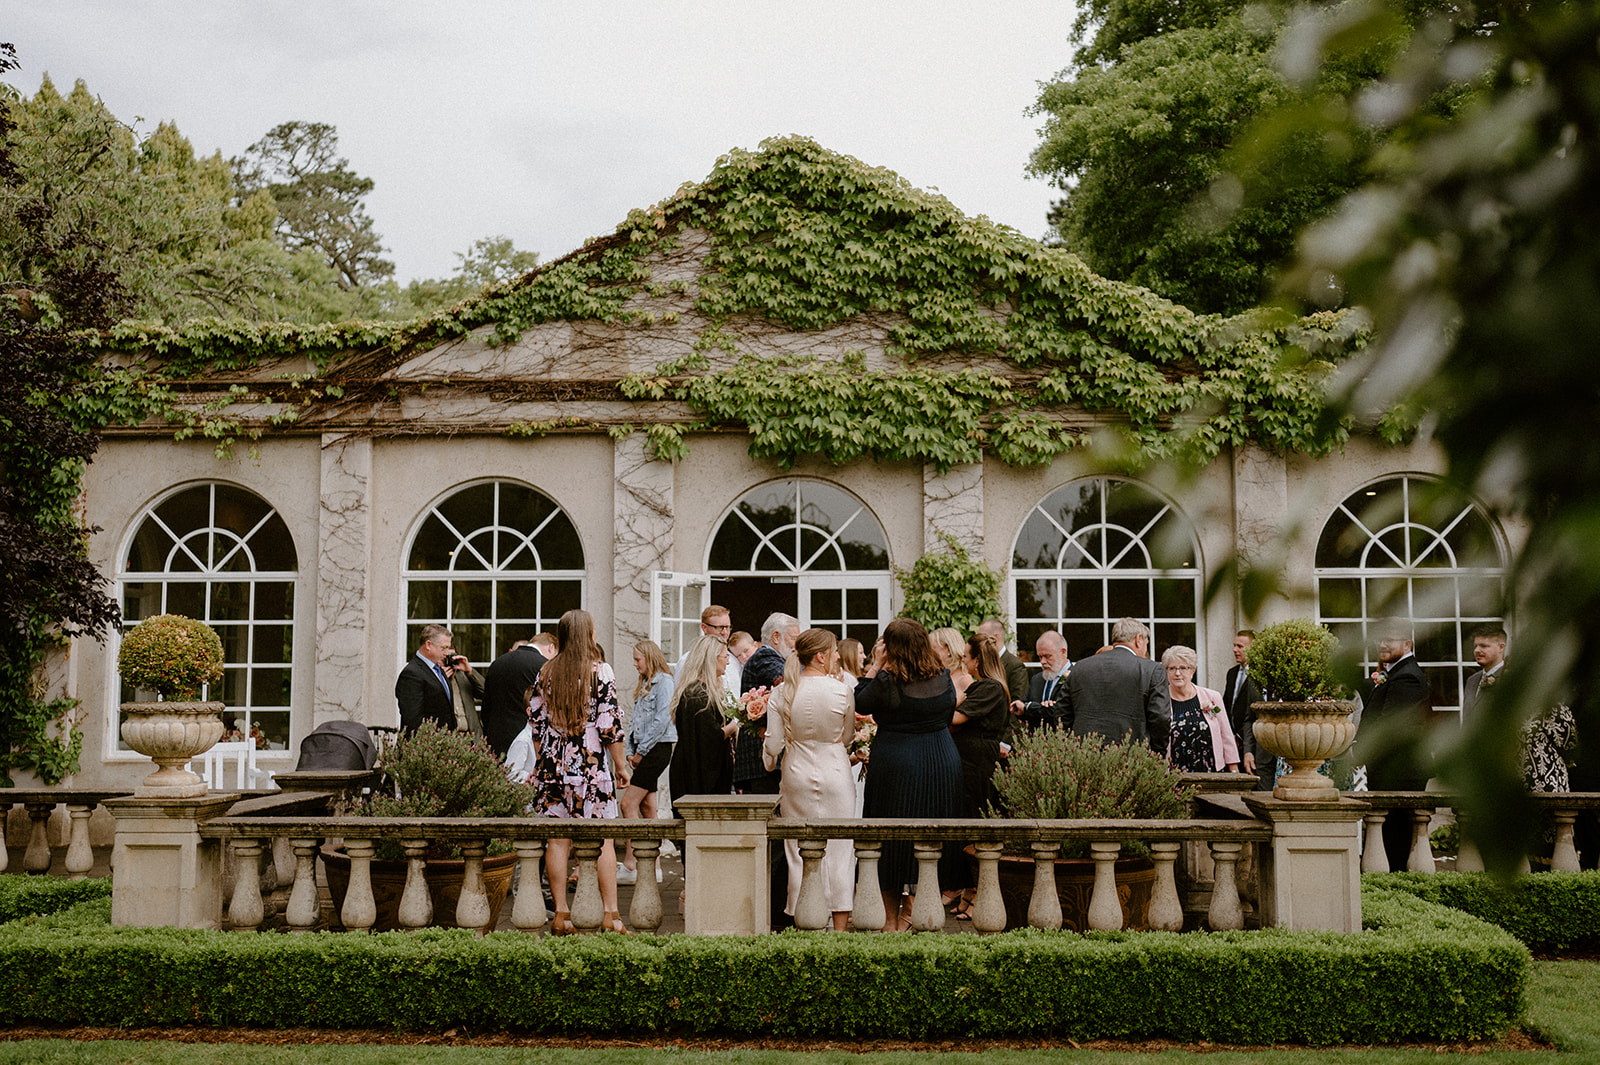 A congregation of guests in from of the ivy covered pool house at a Milton Park Country House wedding.